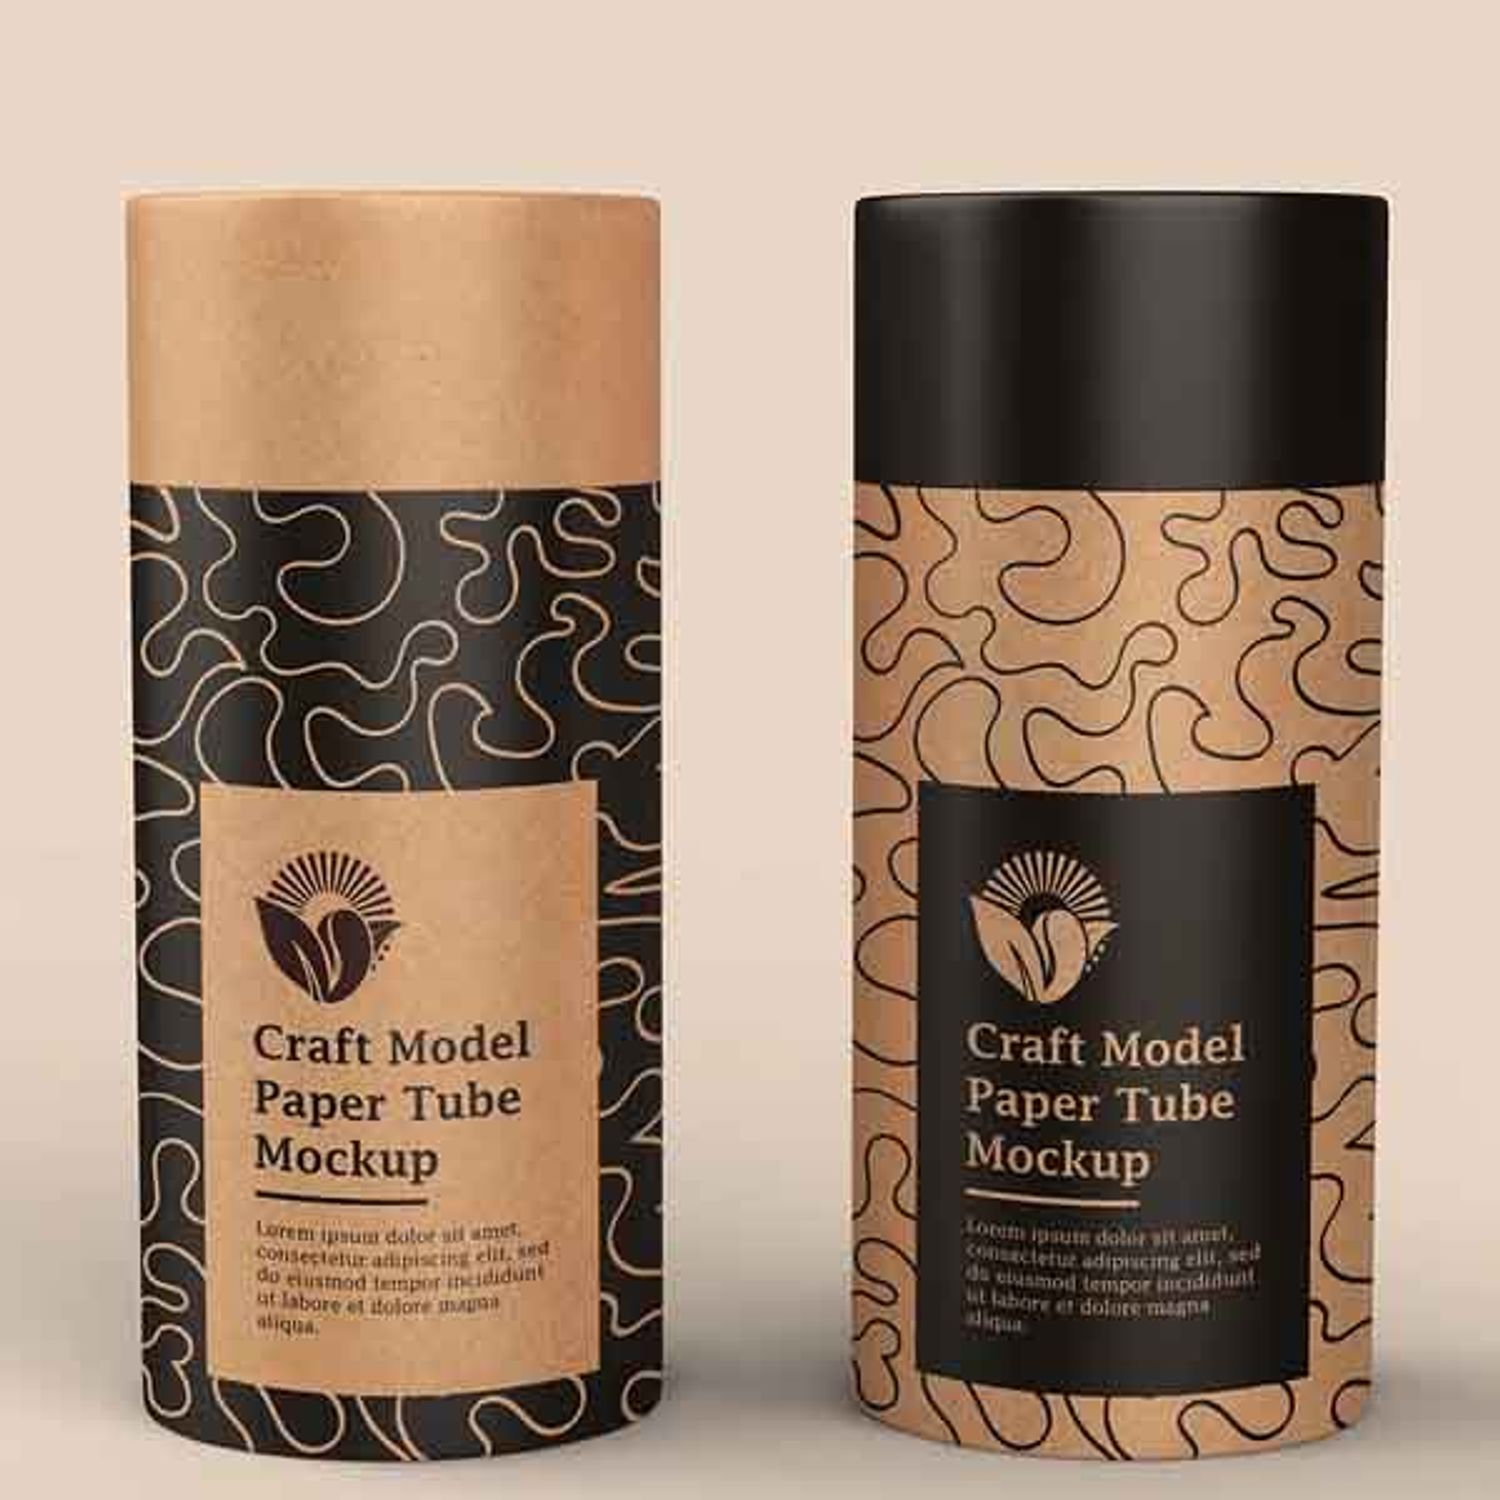 Wholesale Custom-Fit Biodegradable Paper Tubes for Superfood Products
